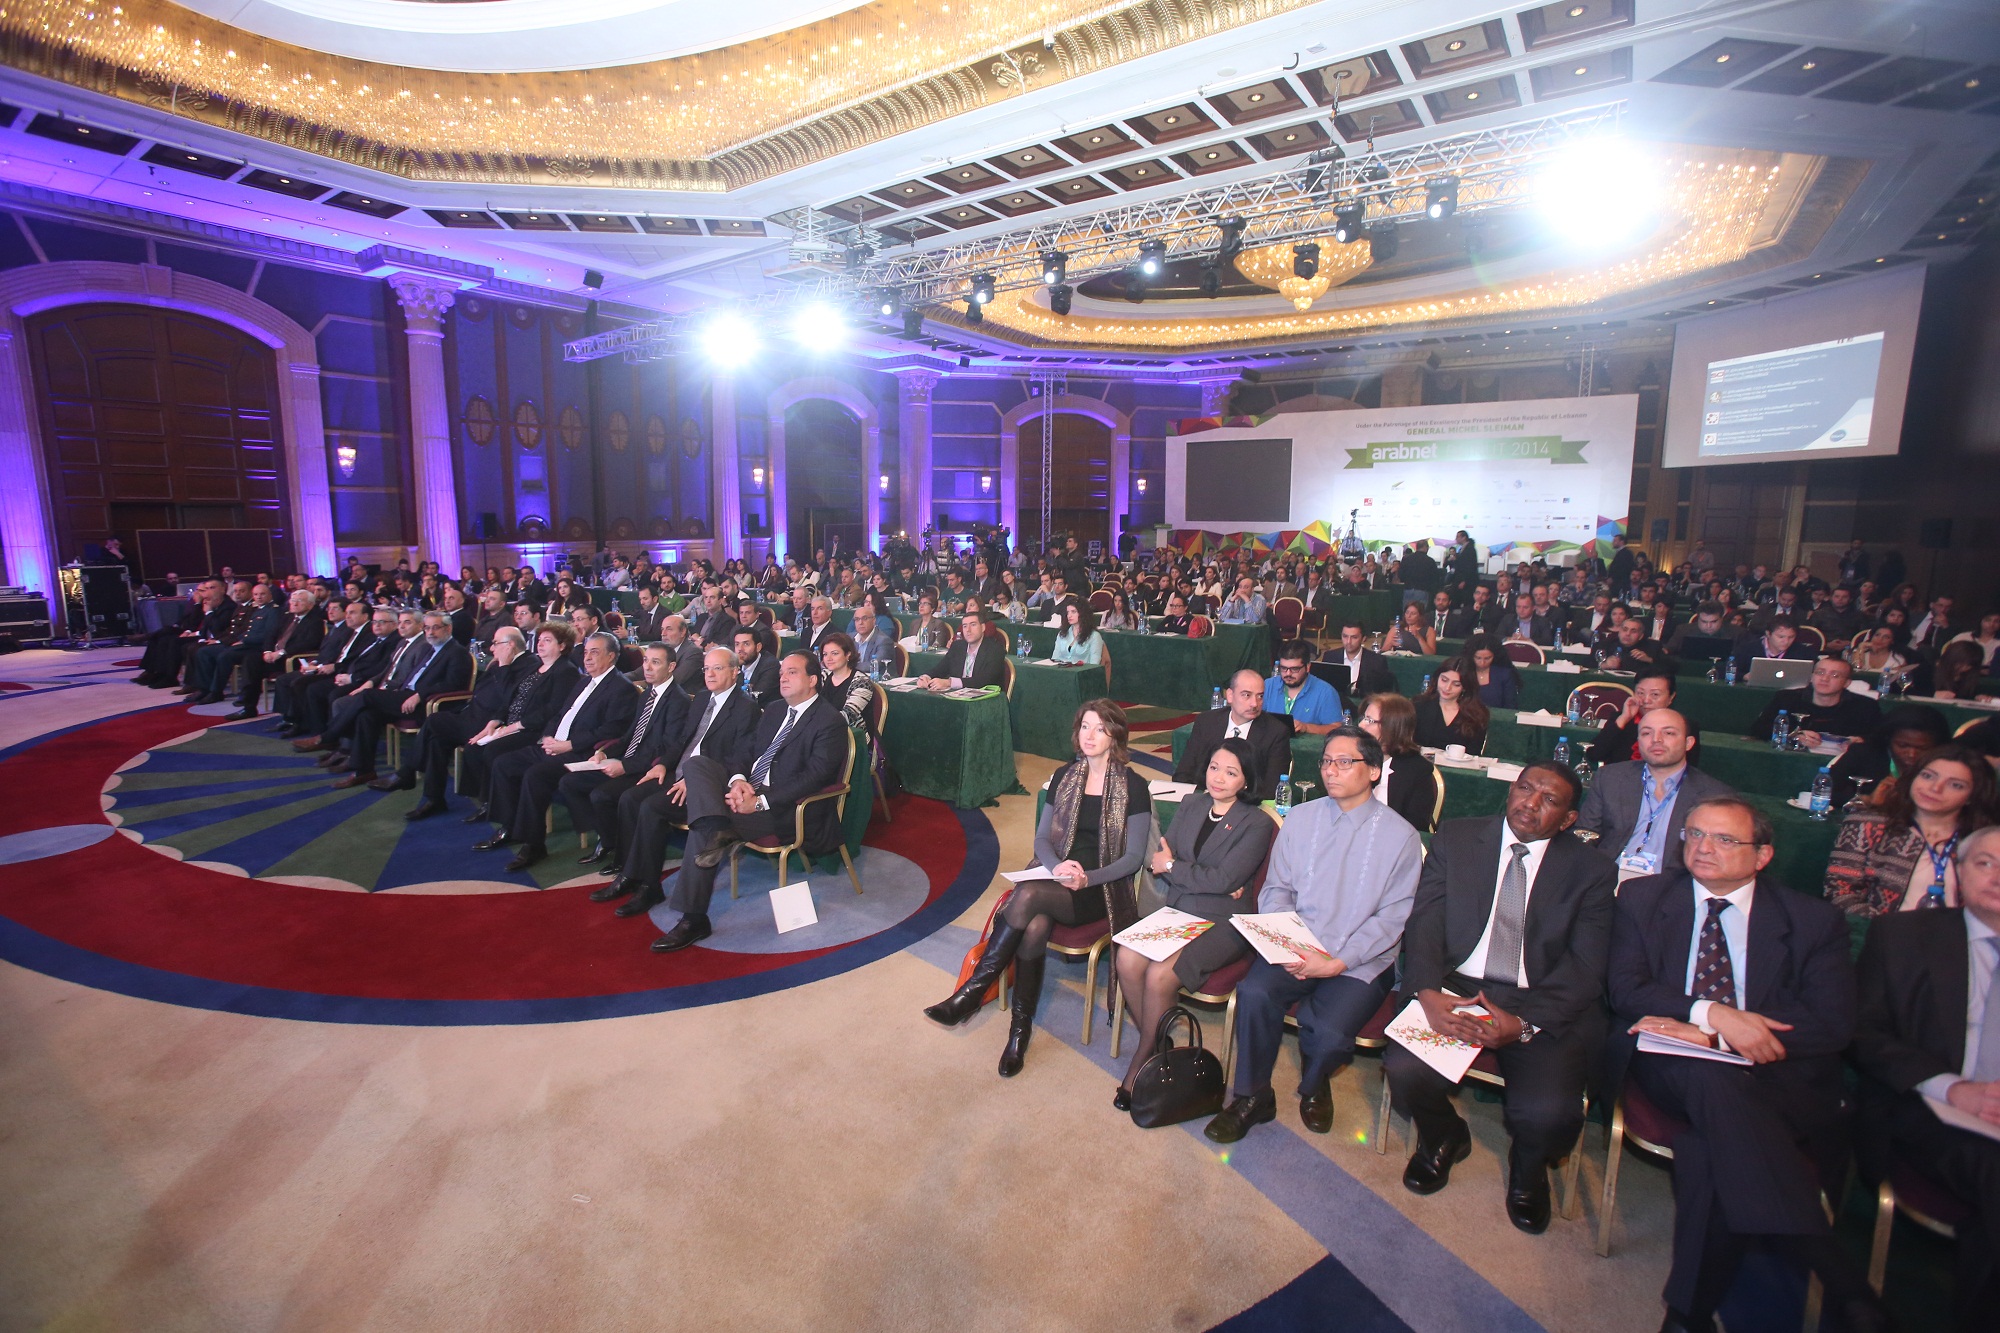 The ArabNet Beirut conference will attract 700 digital professionals and entrepreneurs for a three-day networking and e-learning event. (Photo by Natheer Halawani)